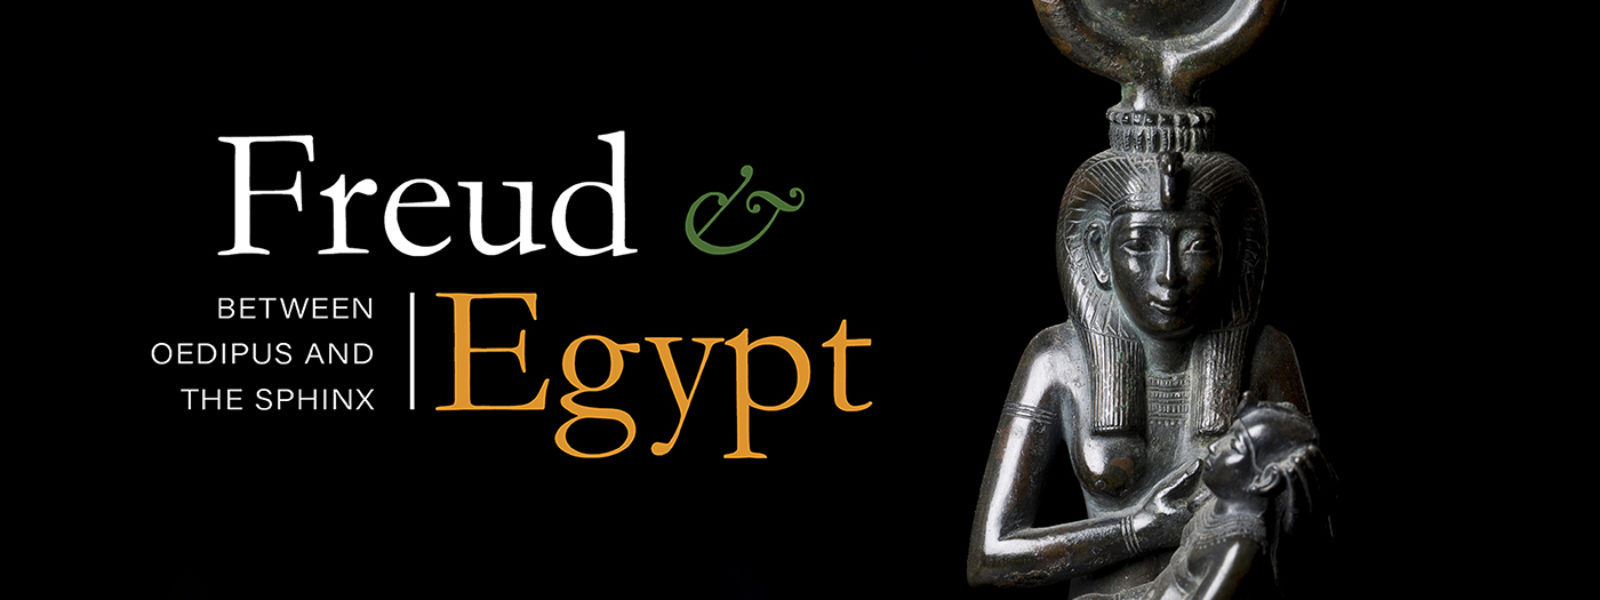 Freud & Egypt explores Freud’s enduring fascination with Egypt